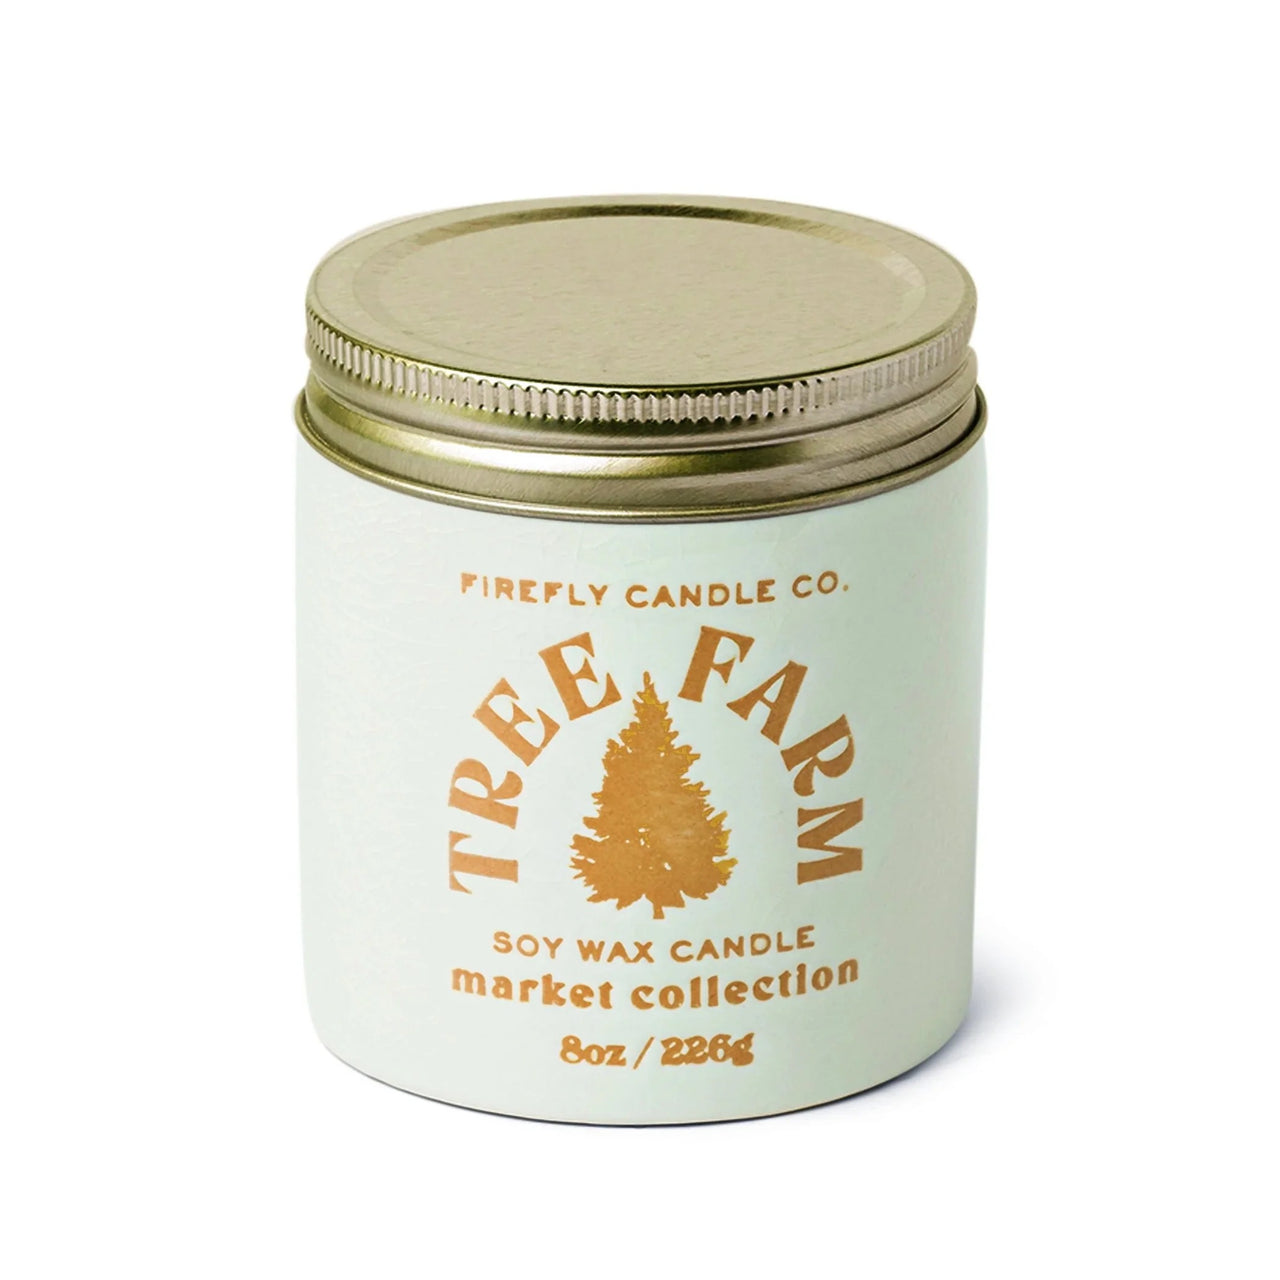 Market Candle - Tree Farm 8oz Paddywax Winter Scents Firefly   